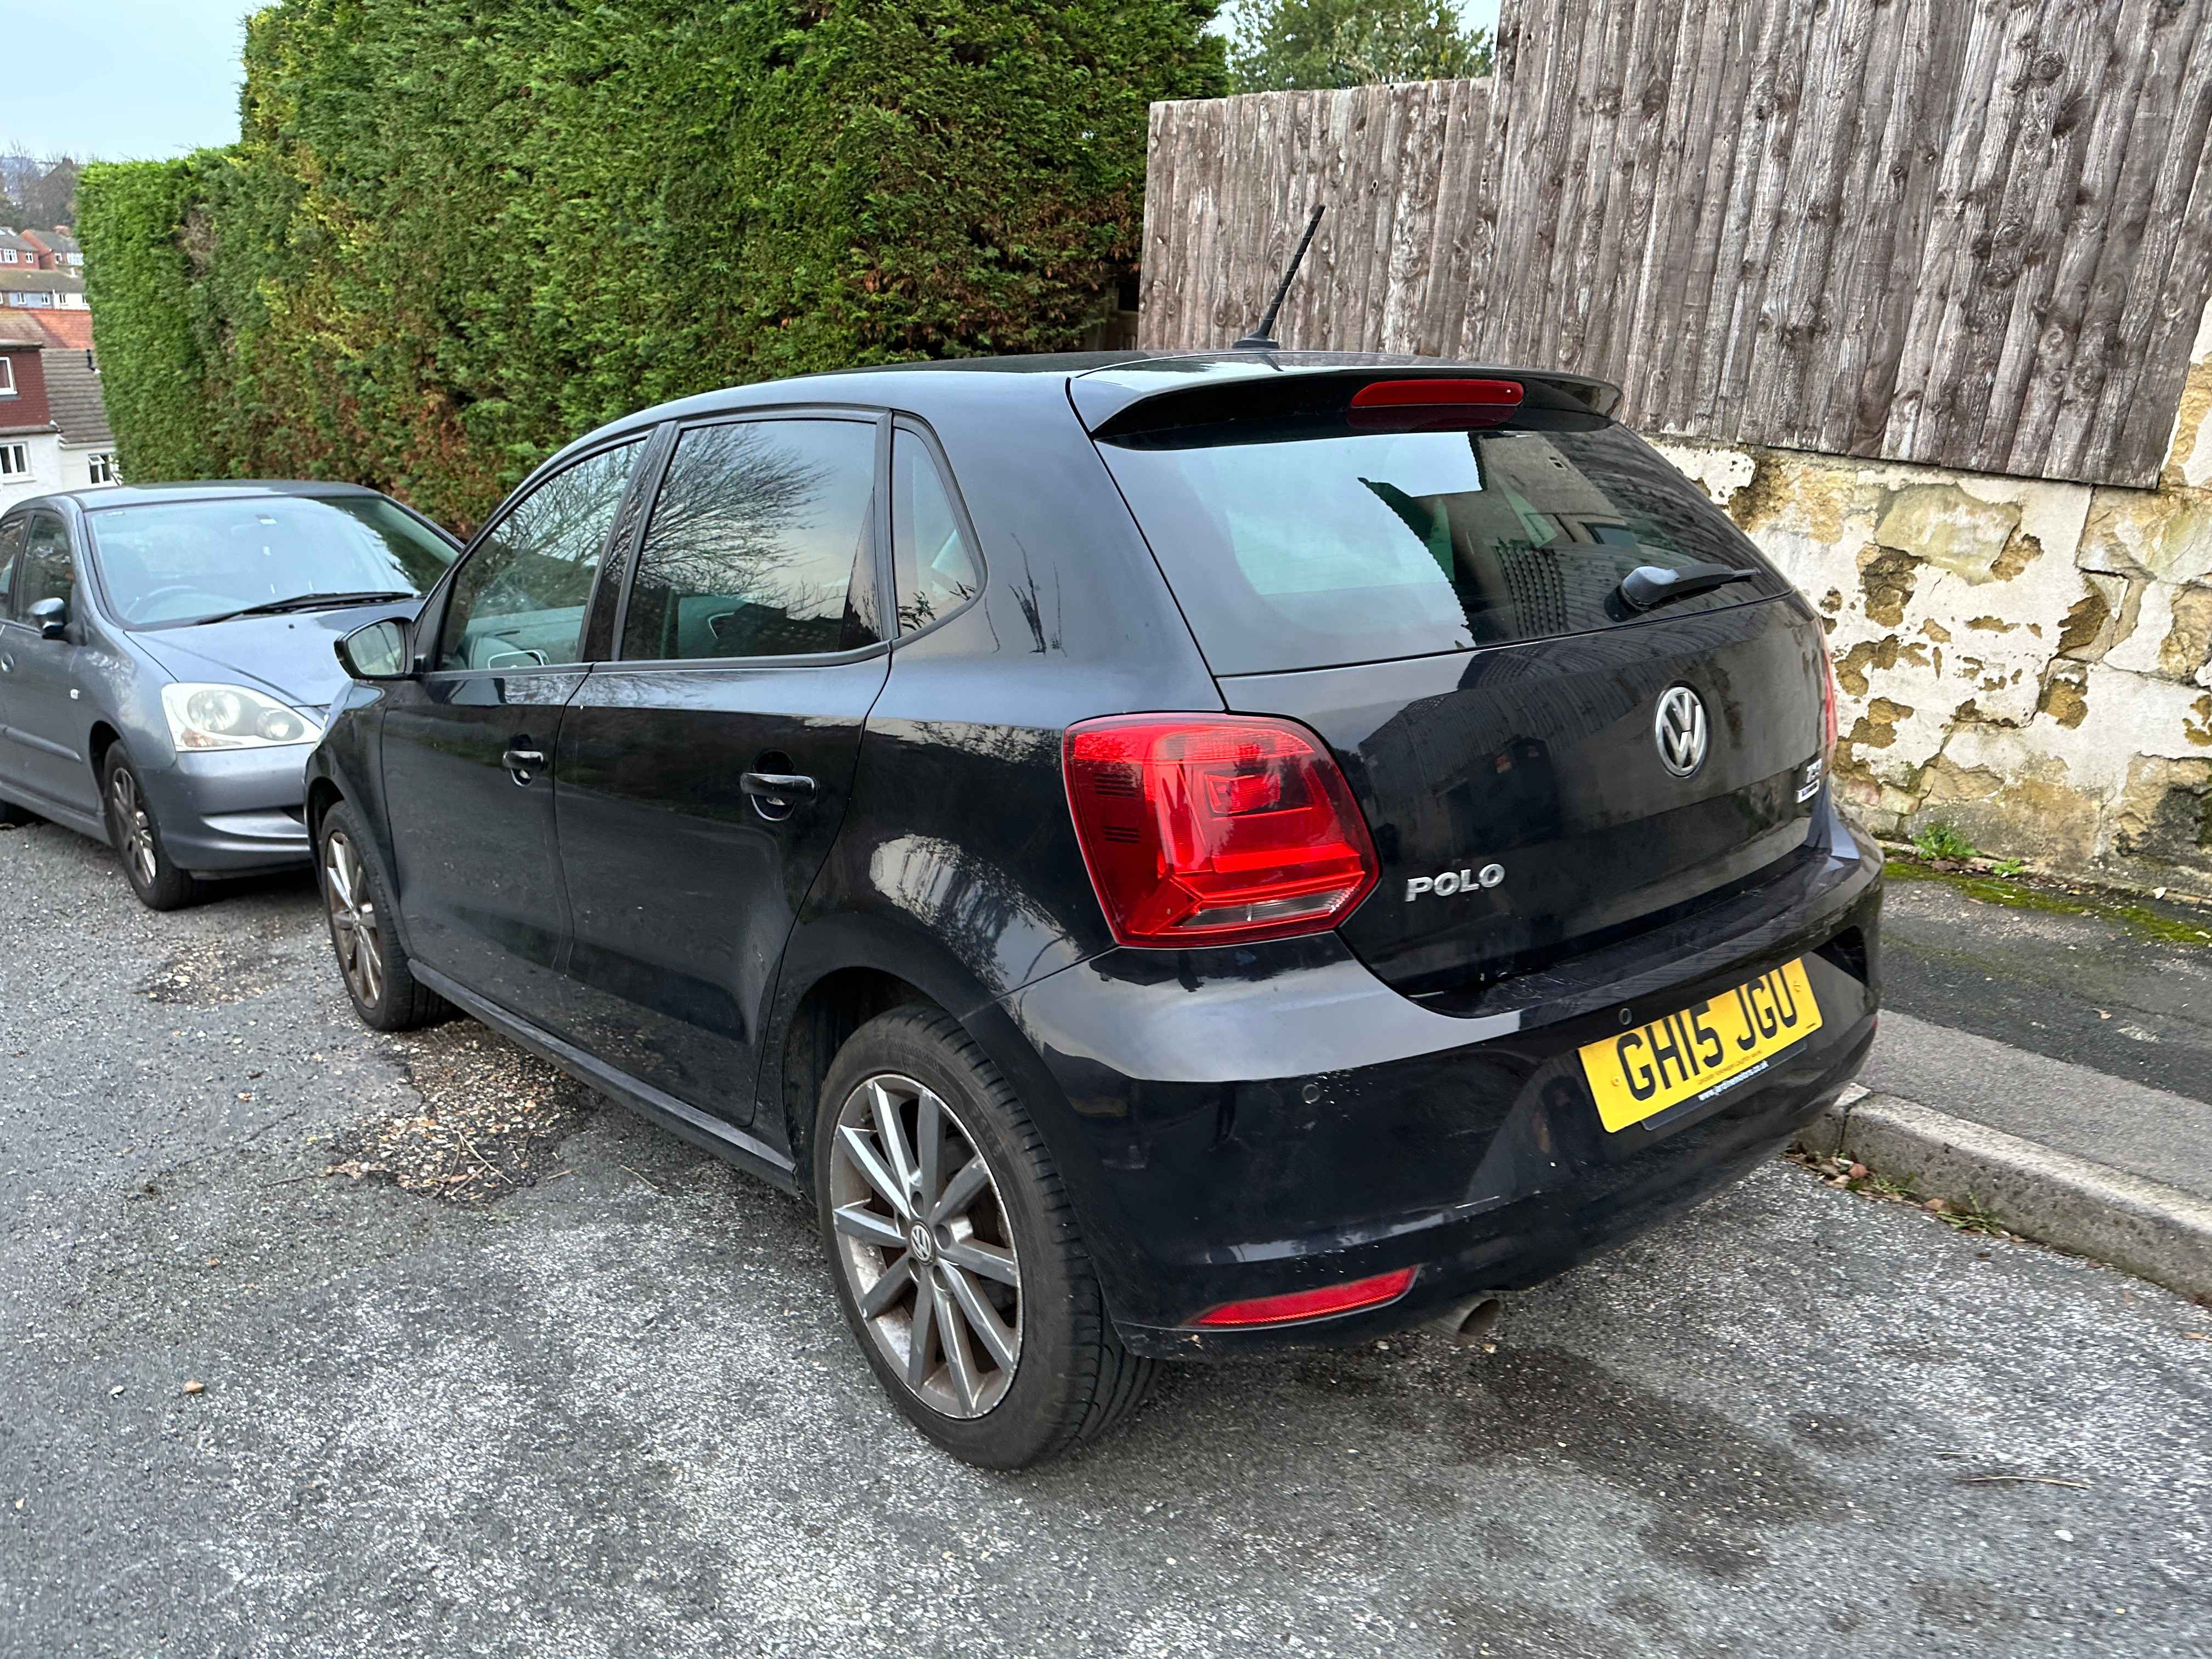 Photograph of GH15 JGU - a Black Volkswagen Polo parked in Hollingdean by a non-resident. The third of three photographs supplied by the residents of Hollingdean.